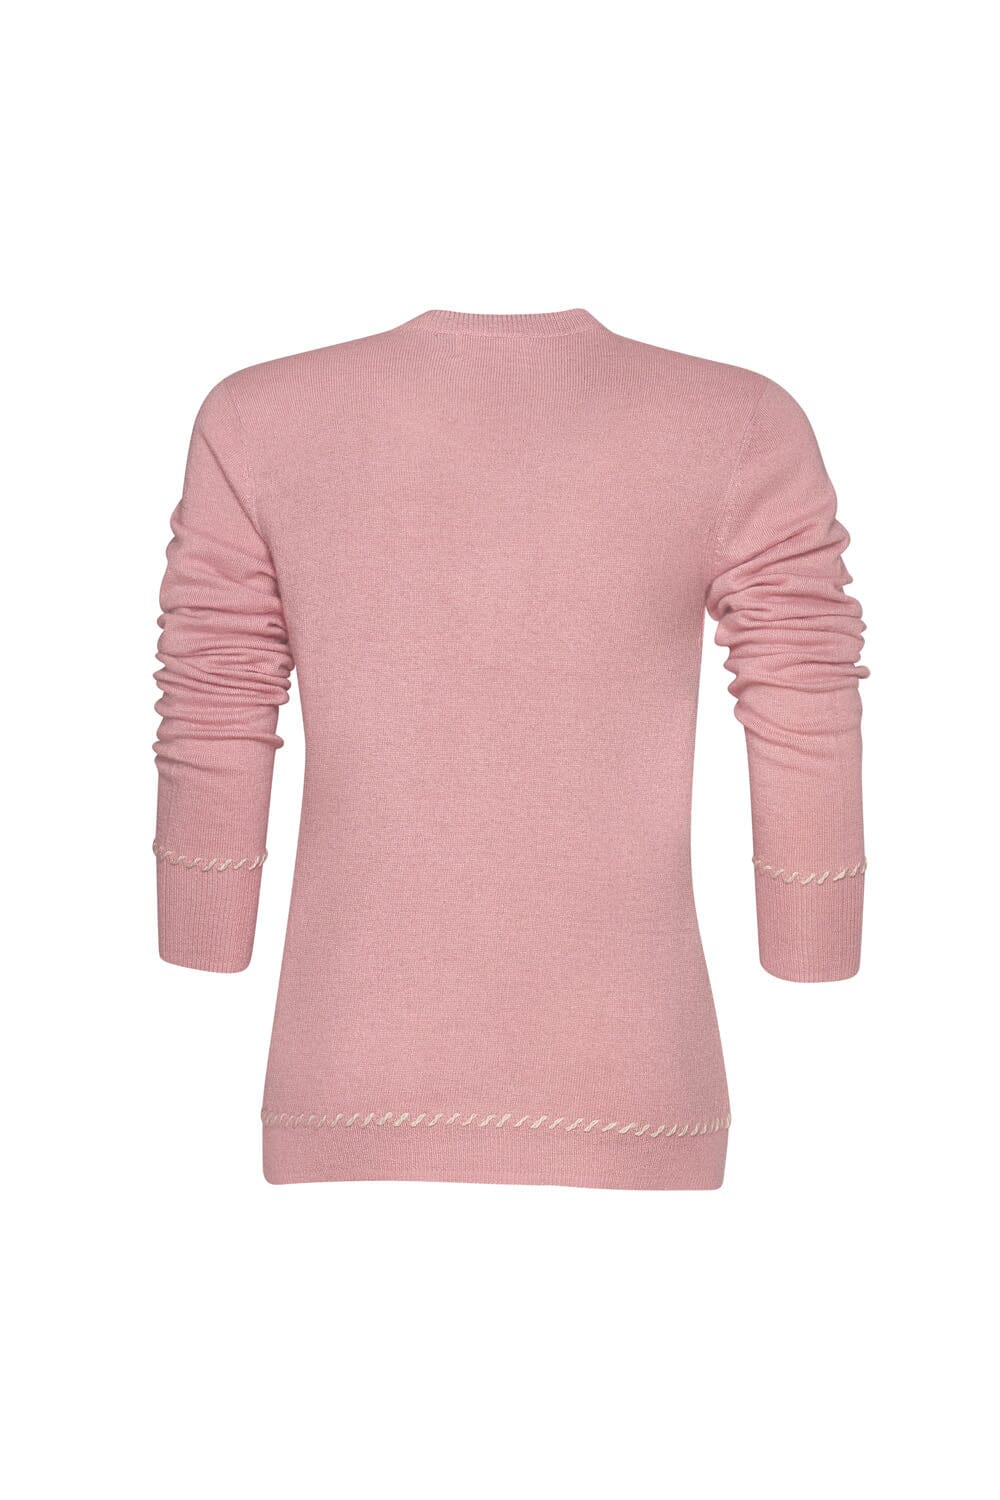 WHIPPED UP SWEATER DUSKY PINK